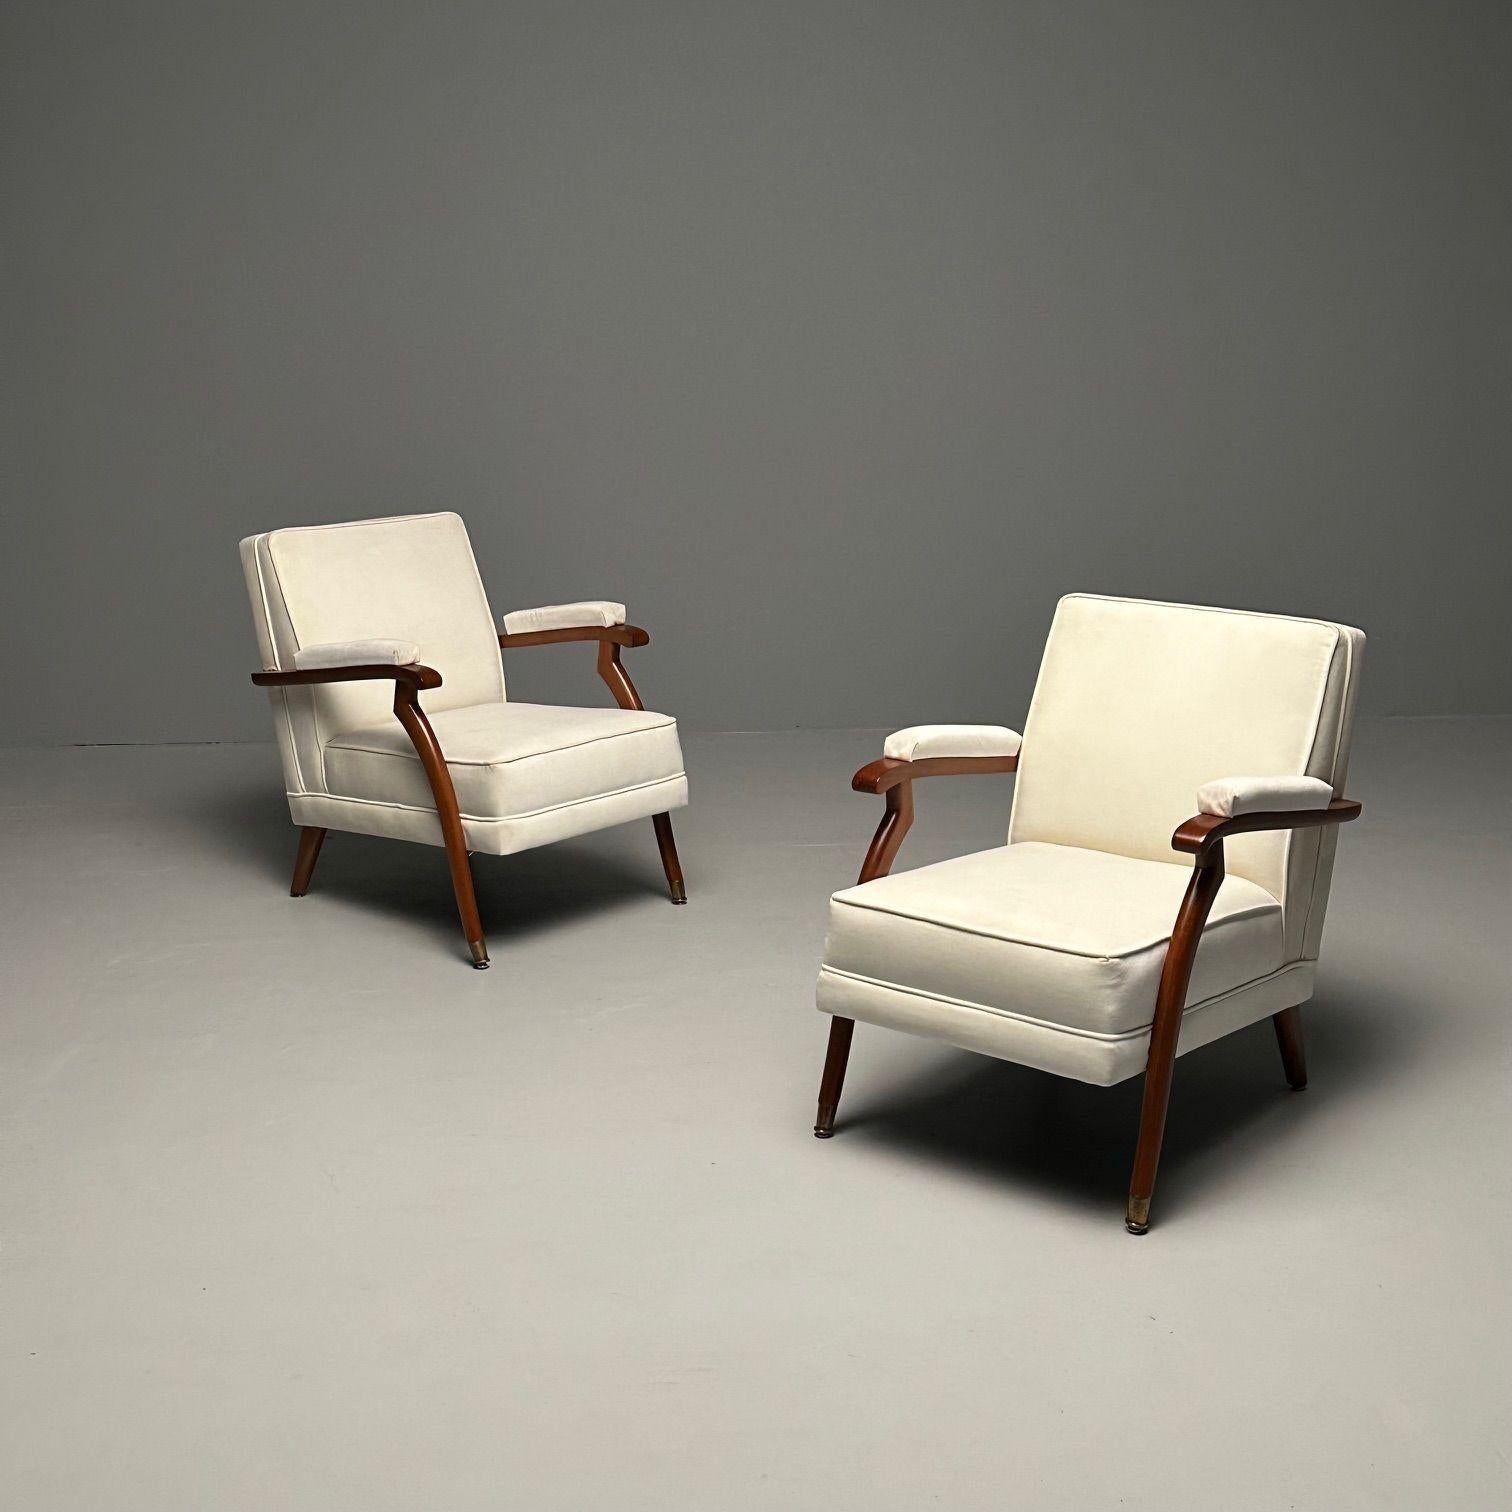 Pair of French Mid-Century Modern Maison Leleu Style Lounge / Arm Chairs, Mohair

Pair of French Art Deco / Mid-Century Modern lounge or arm chairs inspired by Maison Leleu. These chairs having stained and polished birch frames, newly padded arm